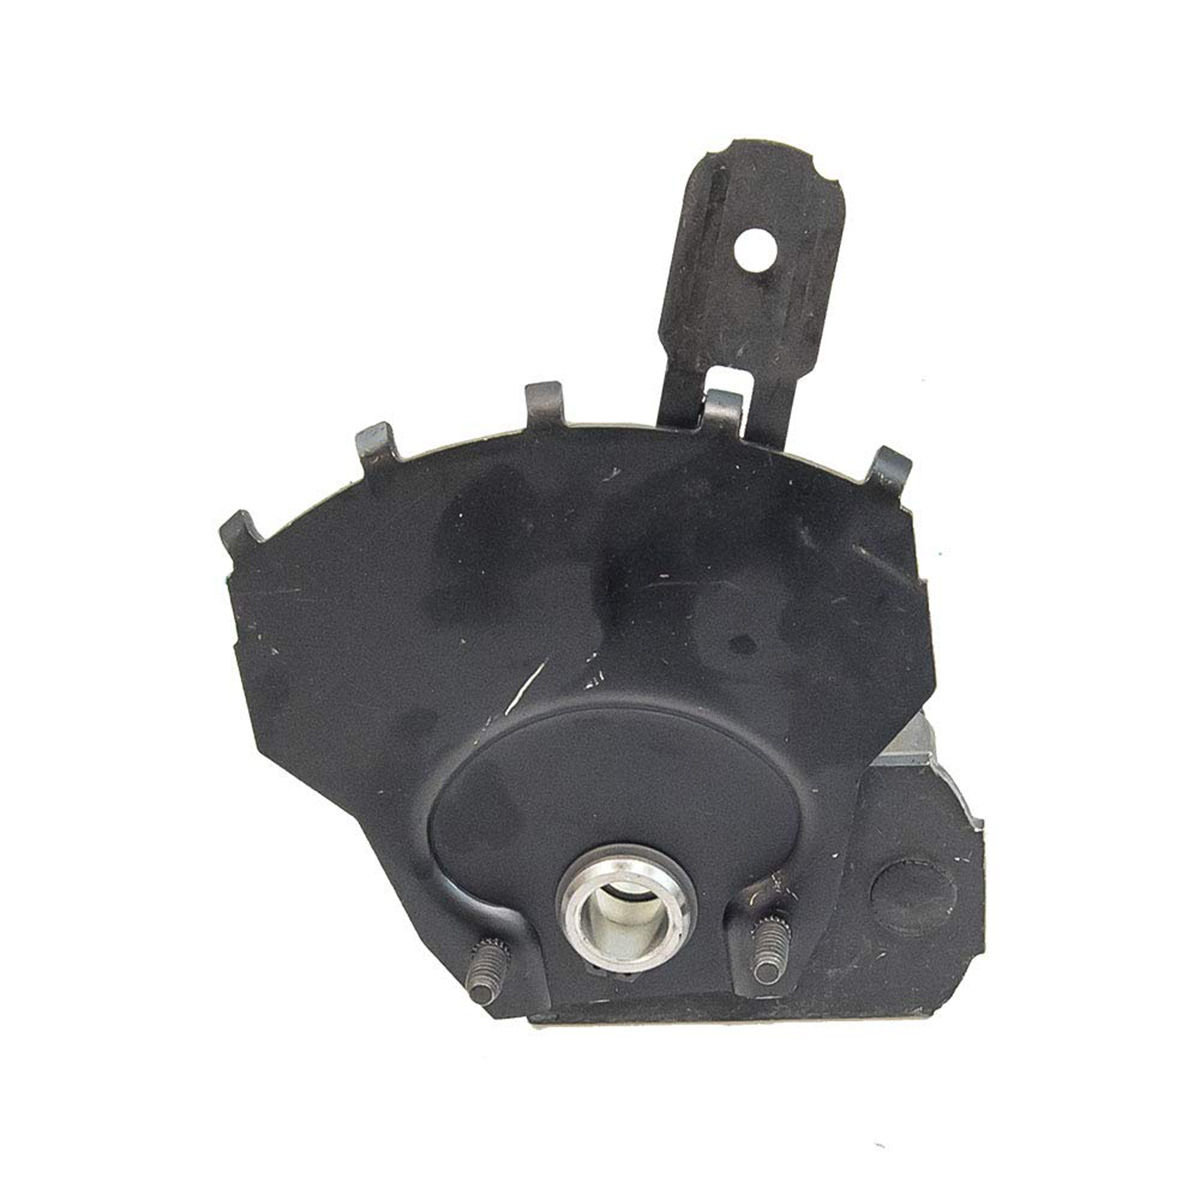 Husqvarna Genuine OEM Replacement Adjuster Assembly # 581497907 - image 1 of 2